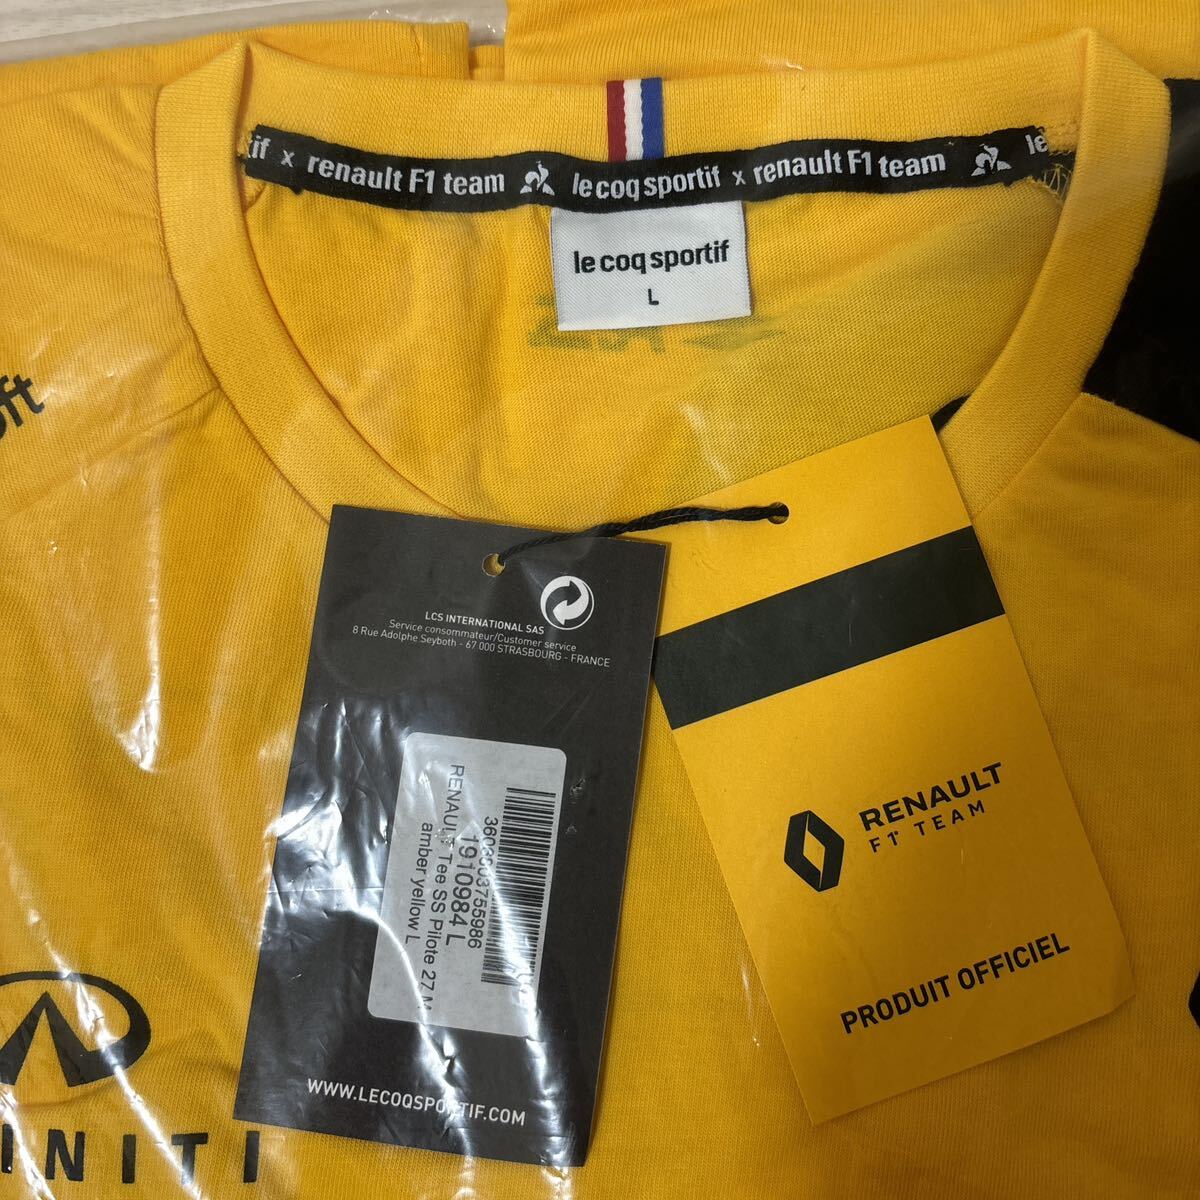  new goods unopened F1 INFINITI RENAULT Infinity Renault F1 team official replica T-shirt size :L regular price :11000 jpy tax included 